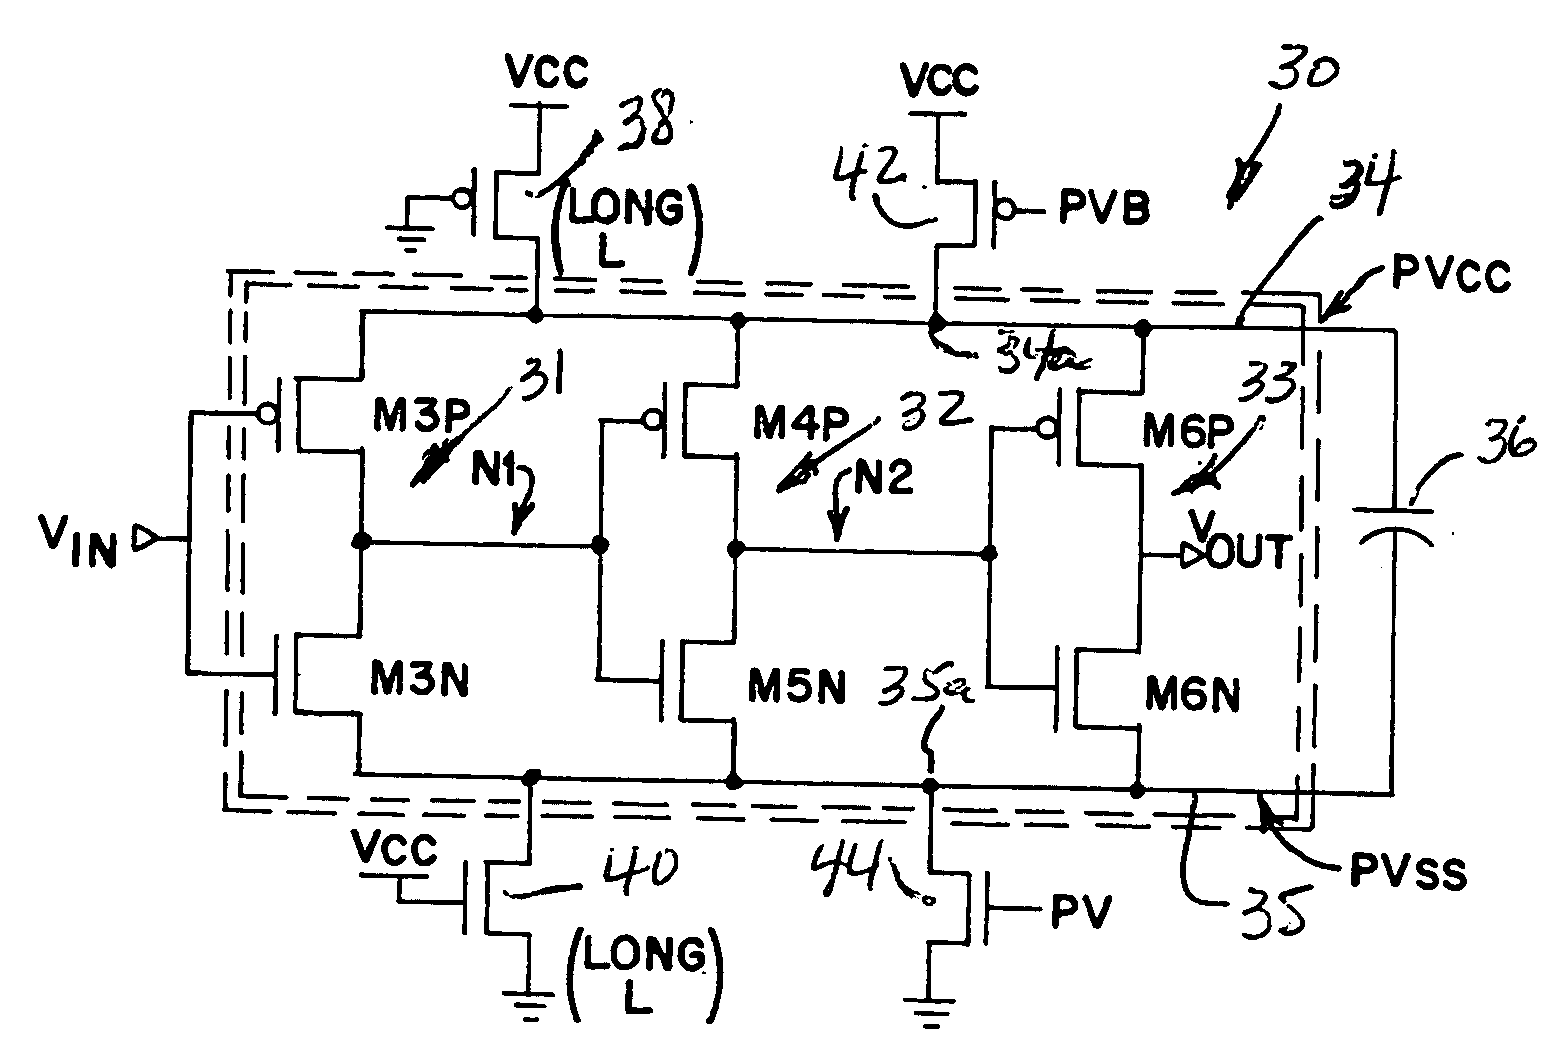 Apparatus and methods for saving power and reducing noise in integrated circuits